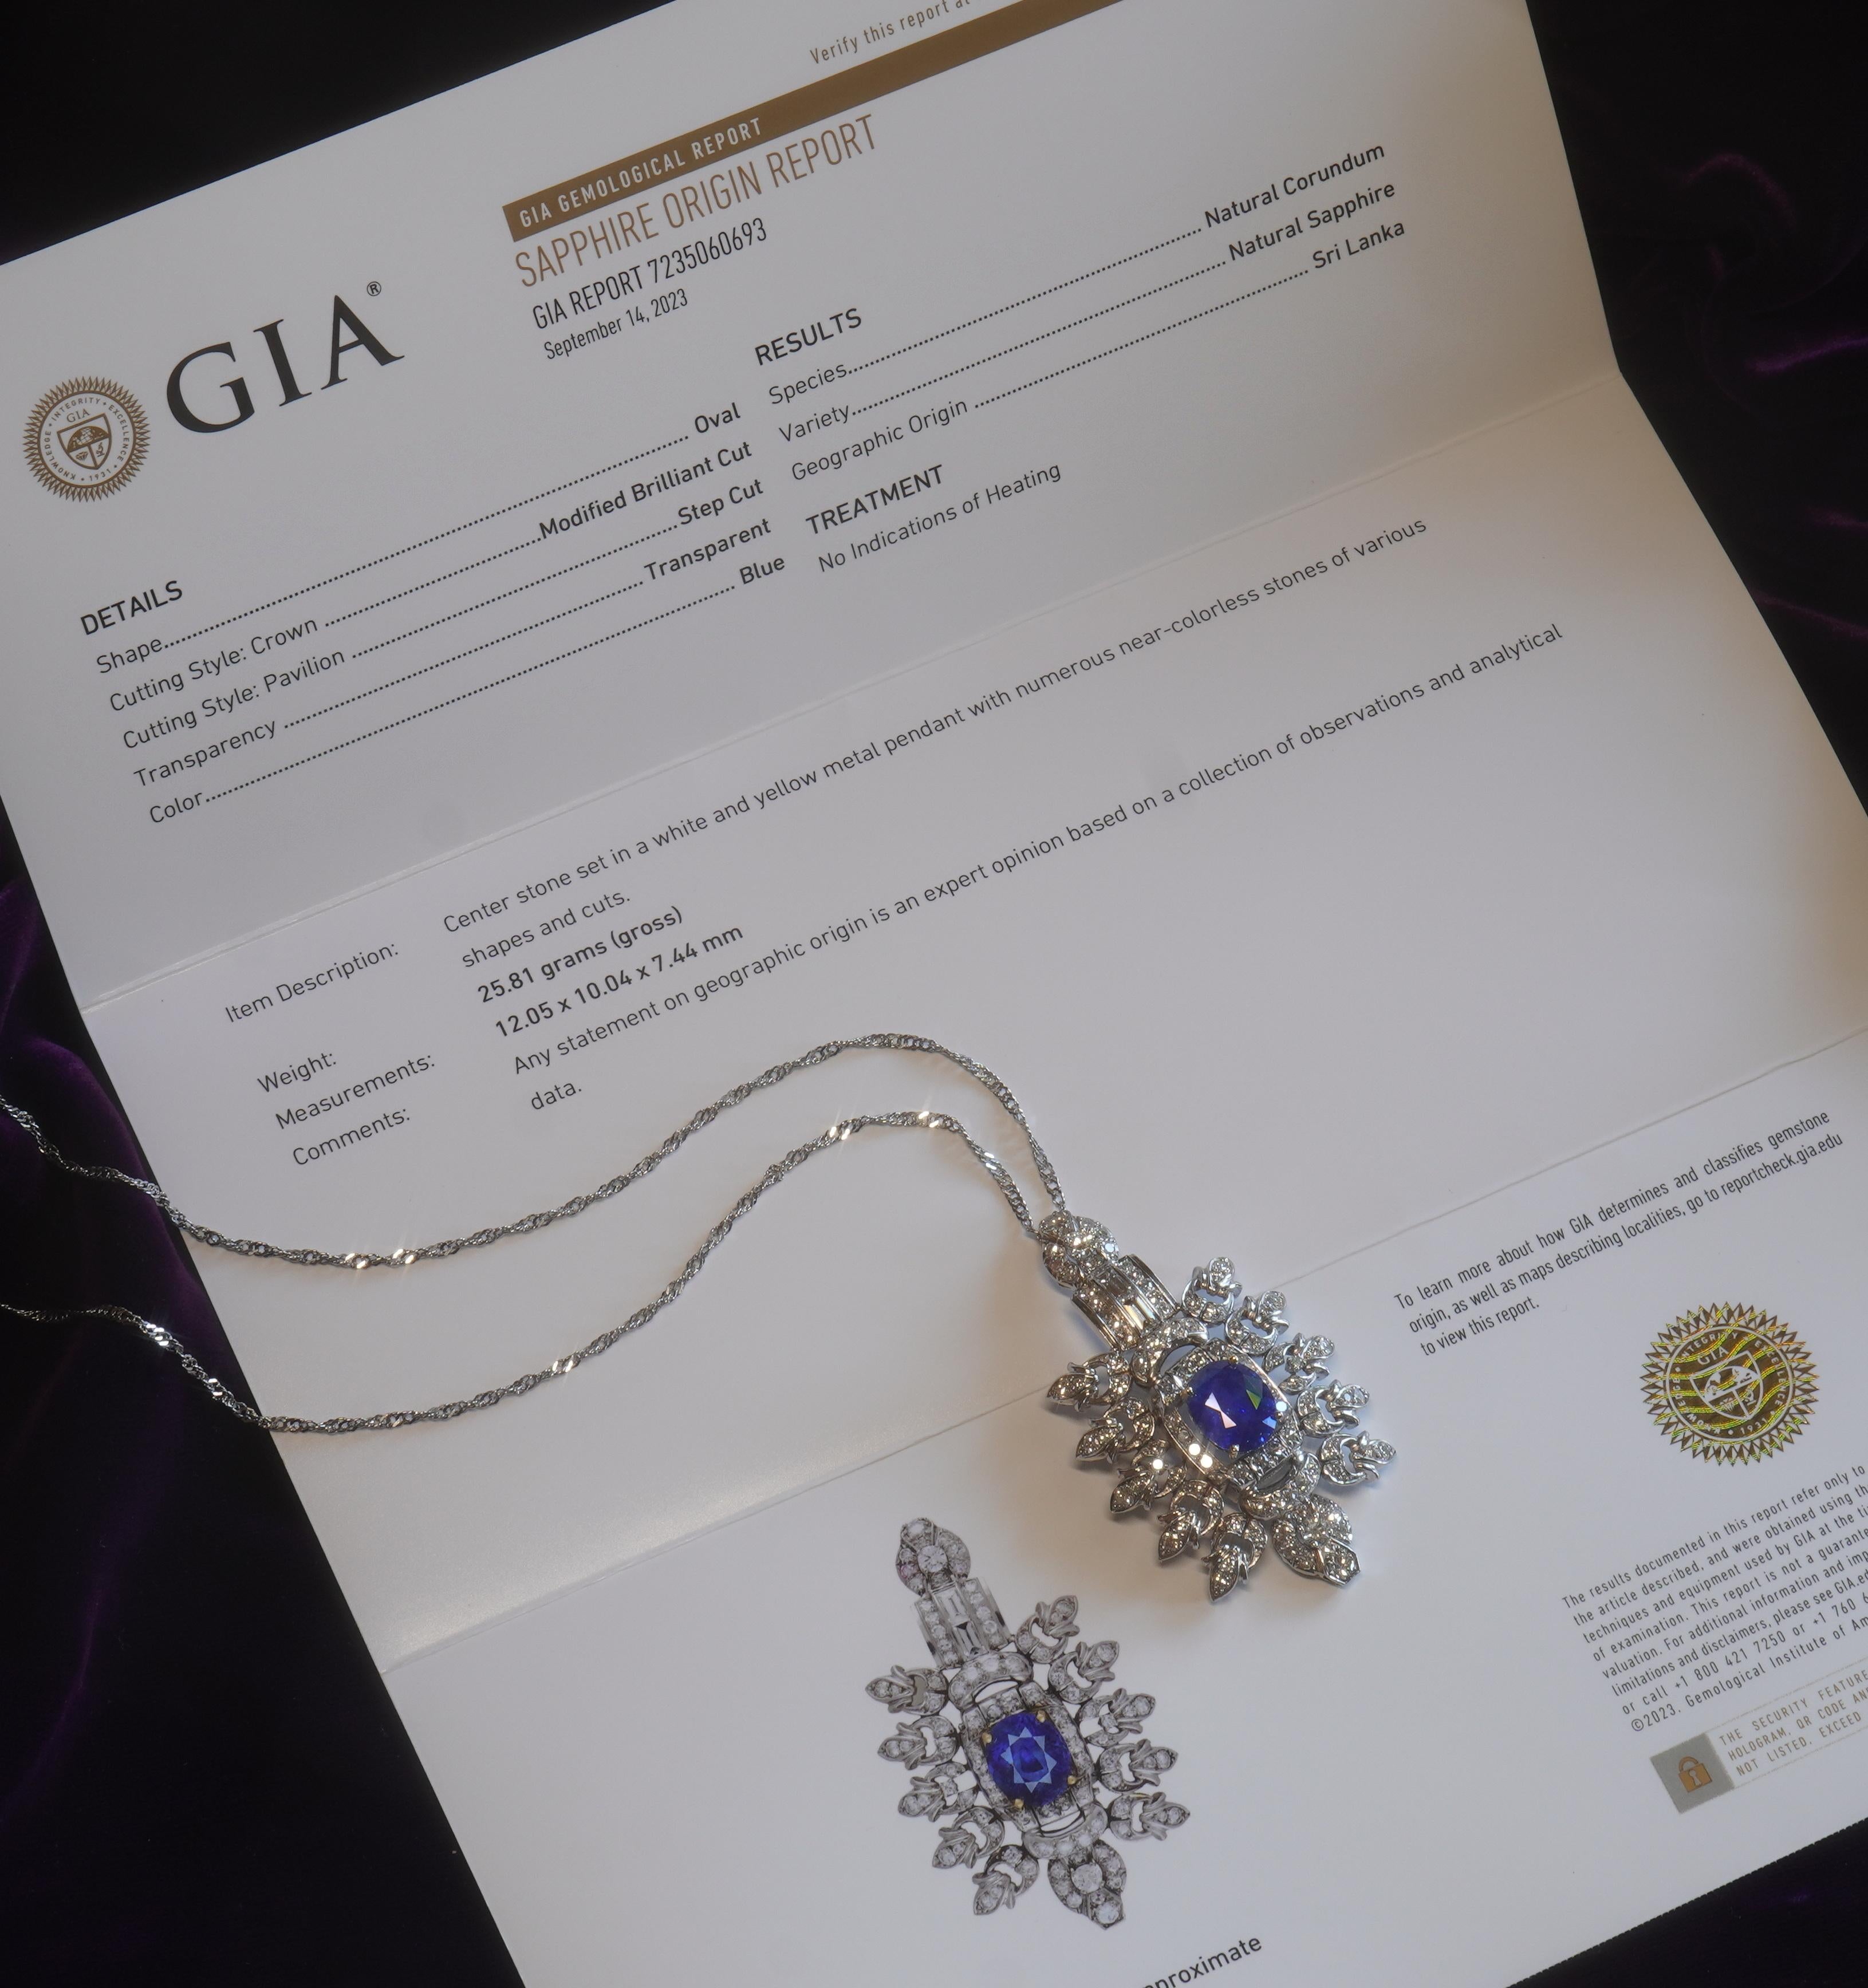 Old South Jewels proudly presents...VINTAGE LUXURY... GIA CERTIFIED PLATINUM 11.26 CARAT UNHEATED SAPPHIRE DIAMOND ANTIQUE PENDANT!   7.24 CARAT TRANSPARENT BLUE GIA CERTIFIED NATURAL NO HEAT SAPPHIRE.  Gorgeous Big Sapphire is Crowned With 4.02